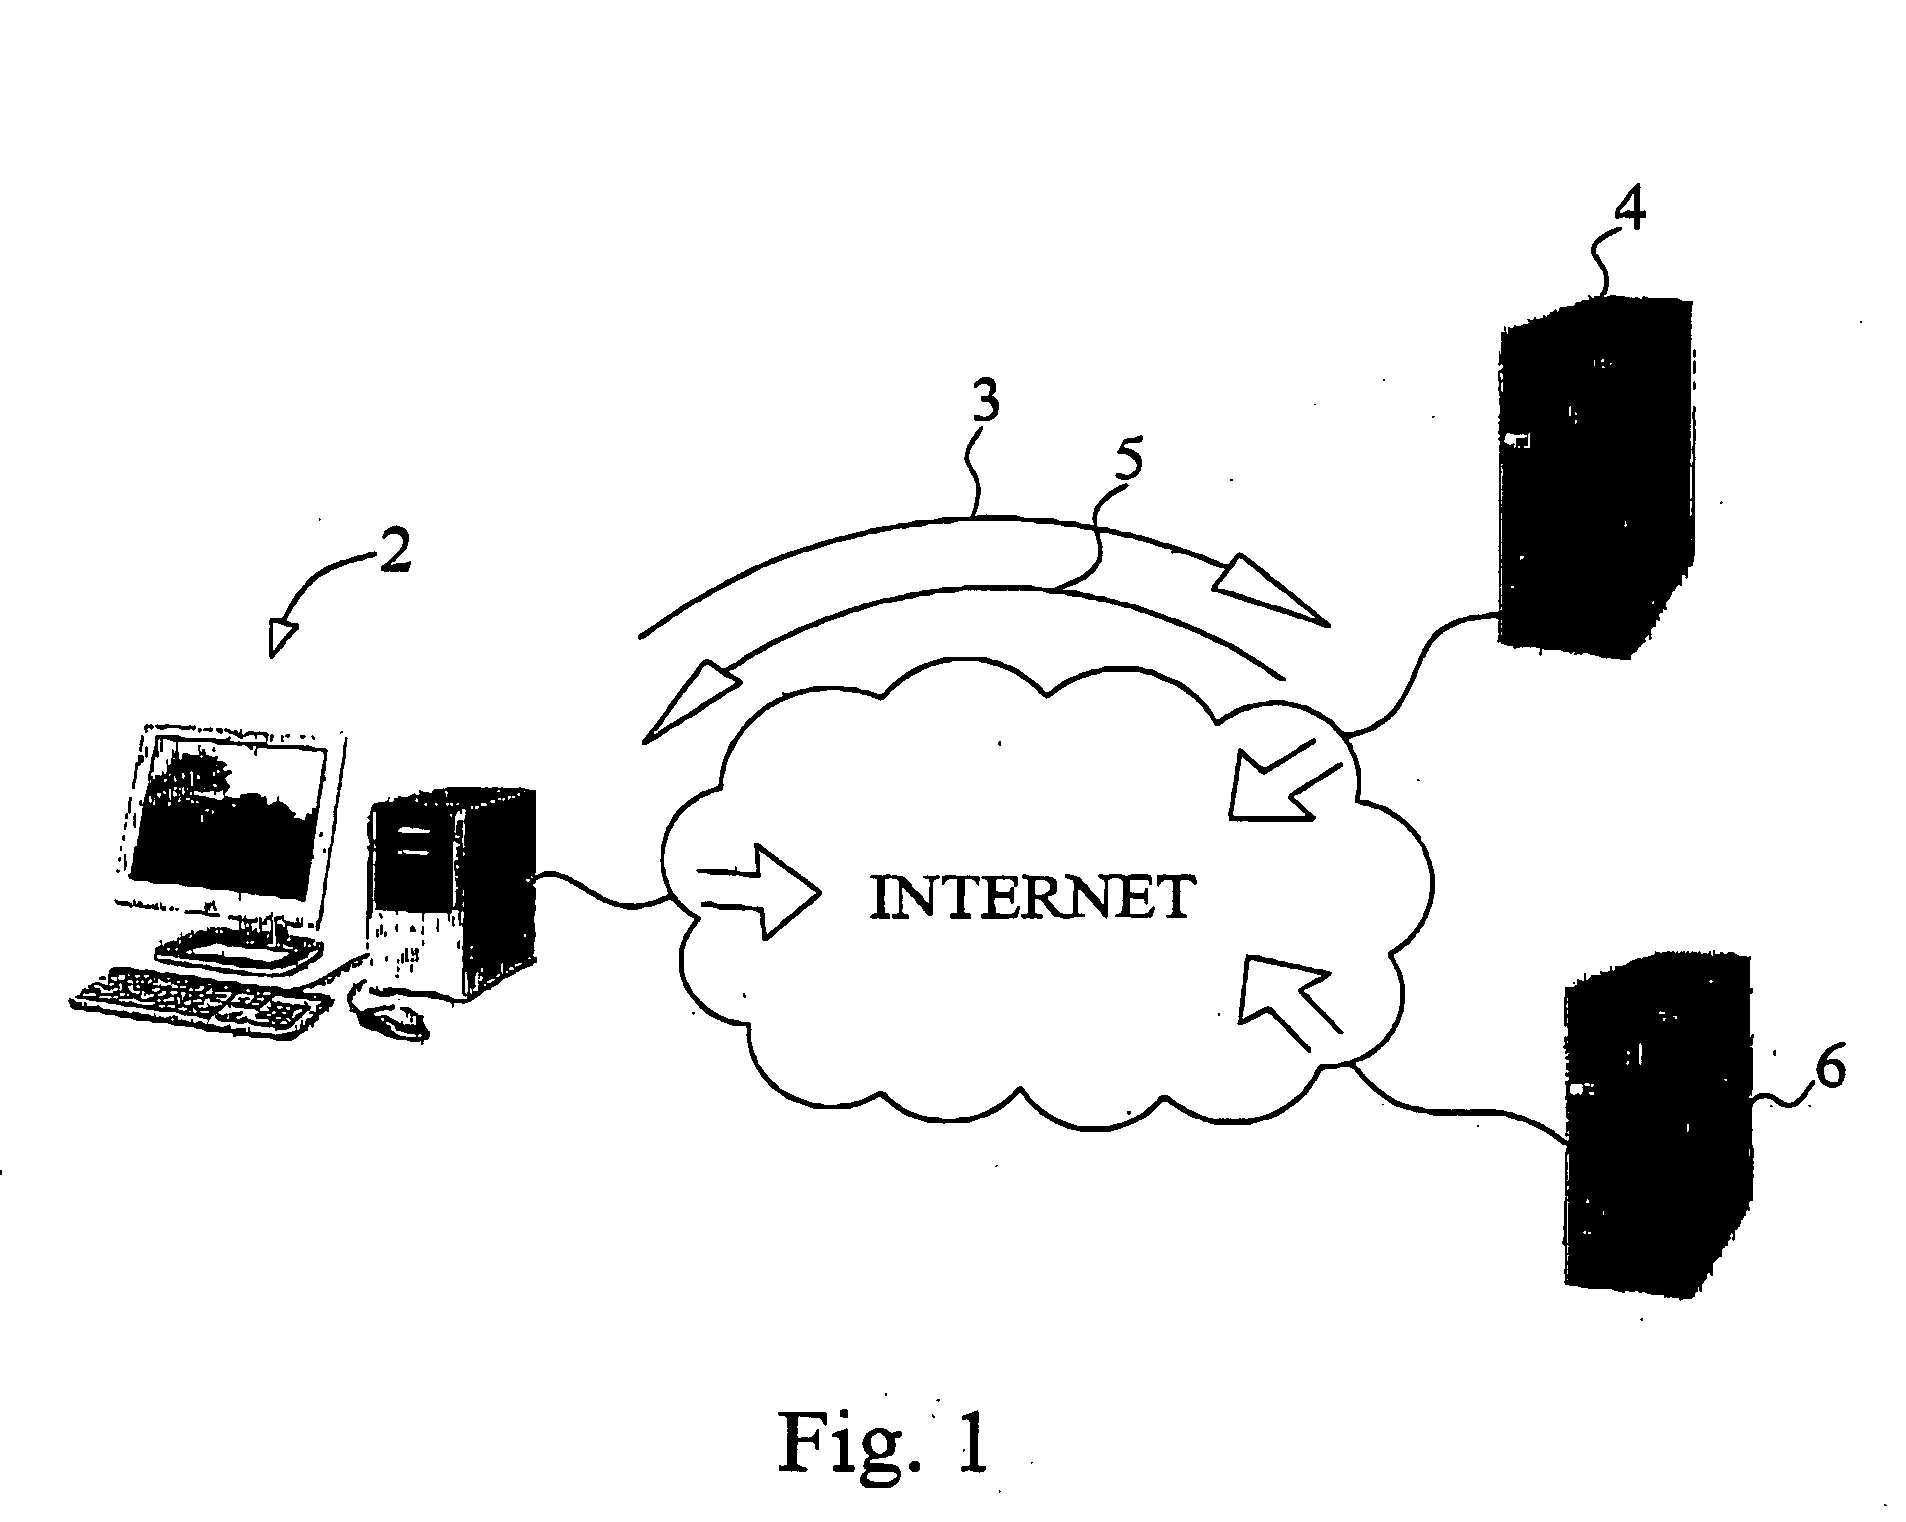 Methods and systems for producing and/or distributing electronic publications